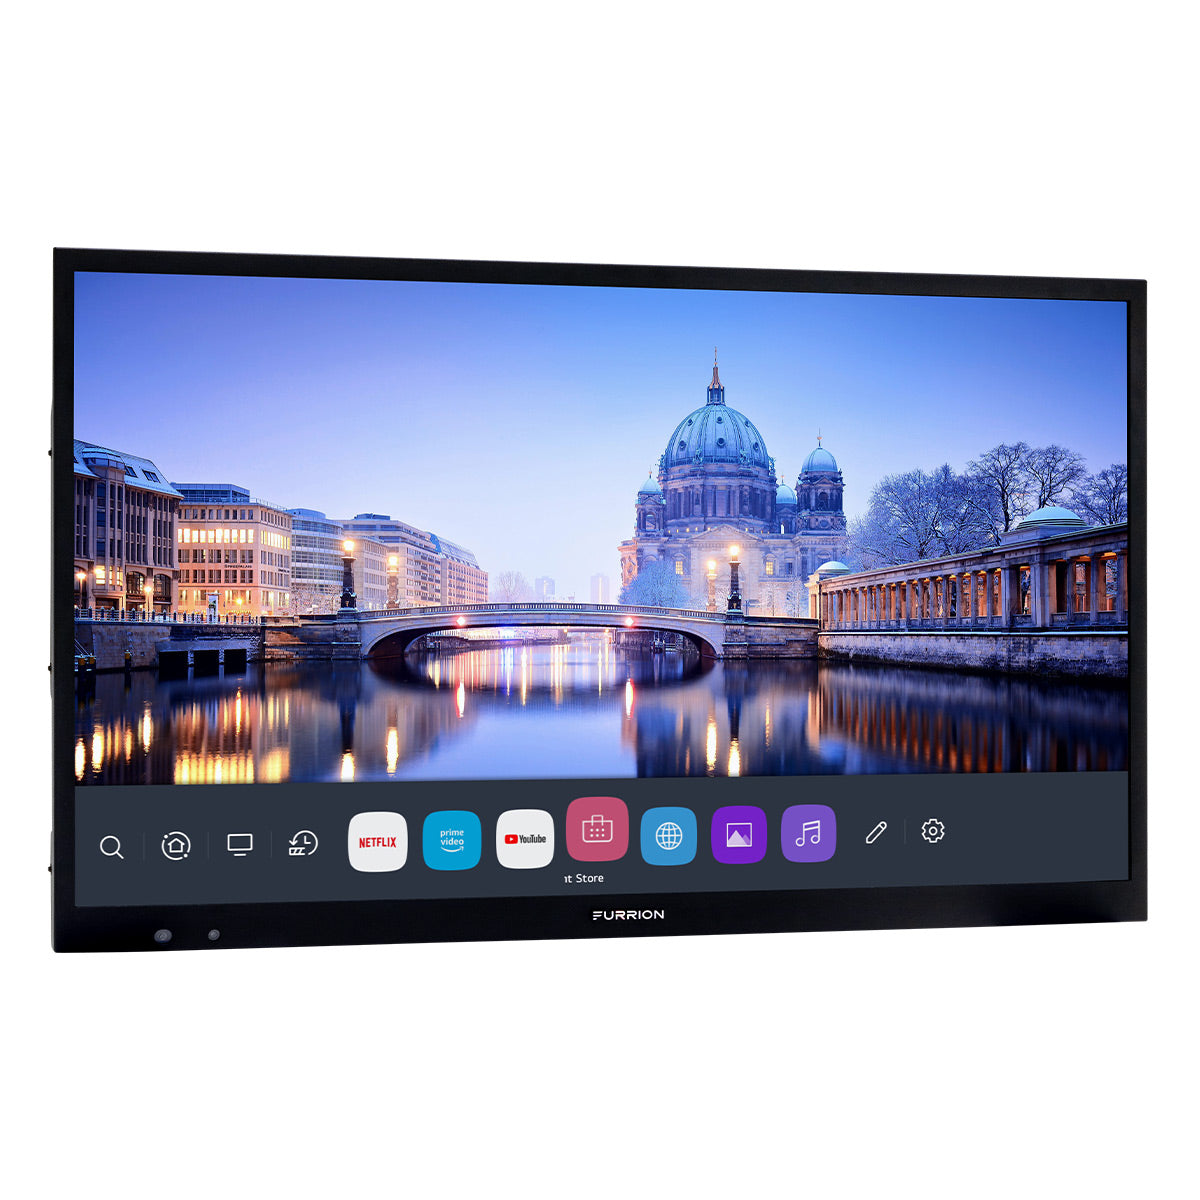 Furrion Aurora 43" Full Shade Smart 4K Ultra-High Definition LED Outdoor TV with IP54 Weatherproof Protection